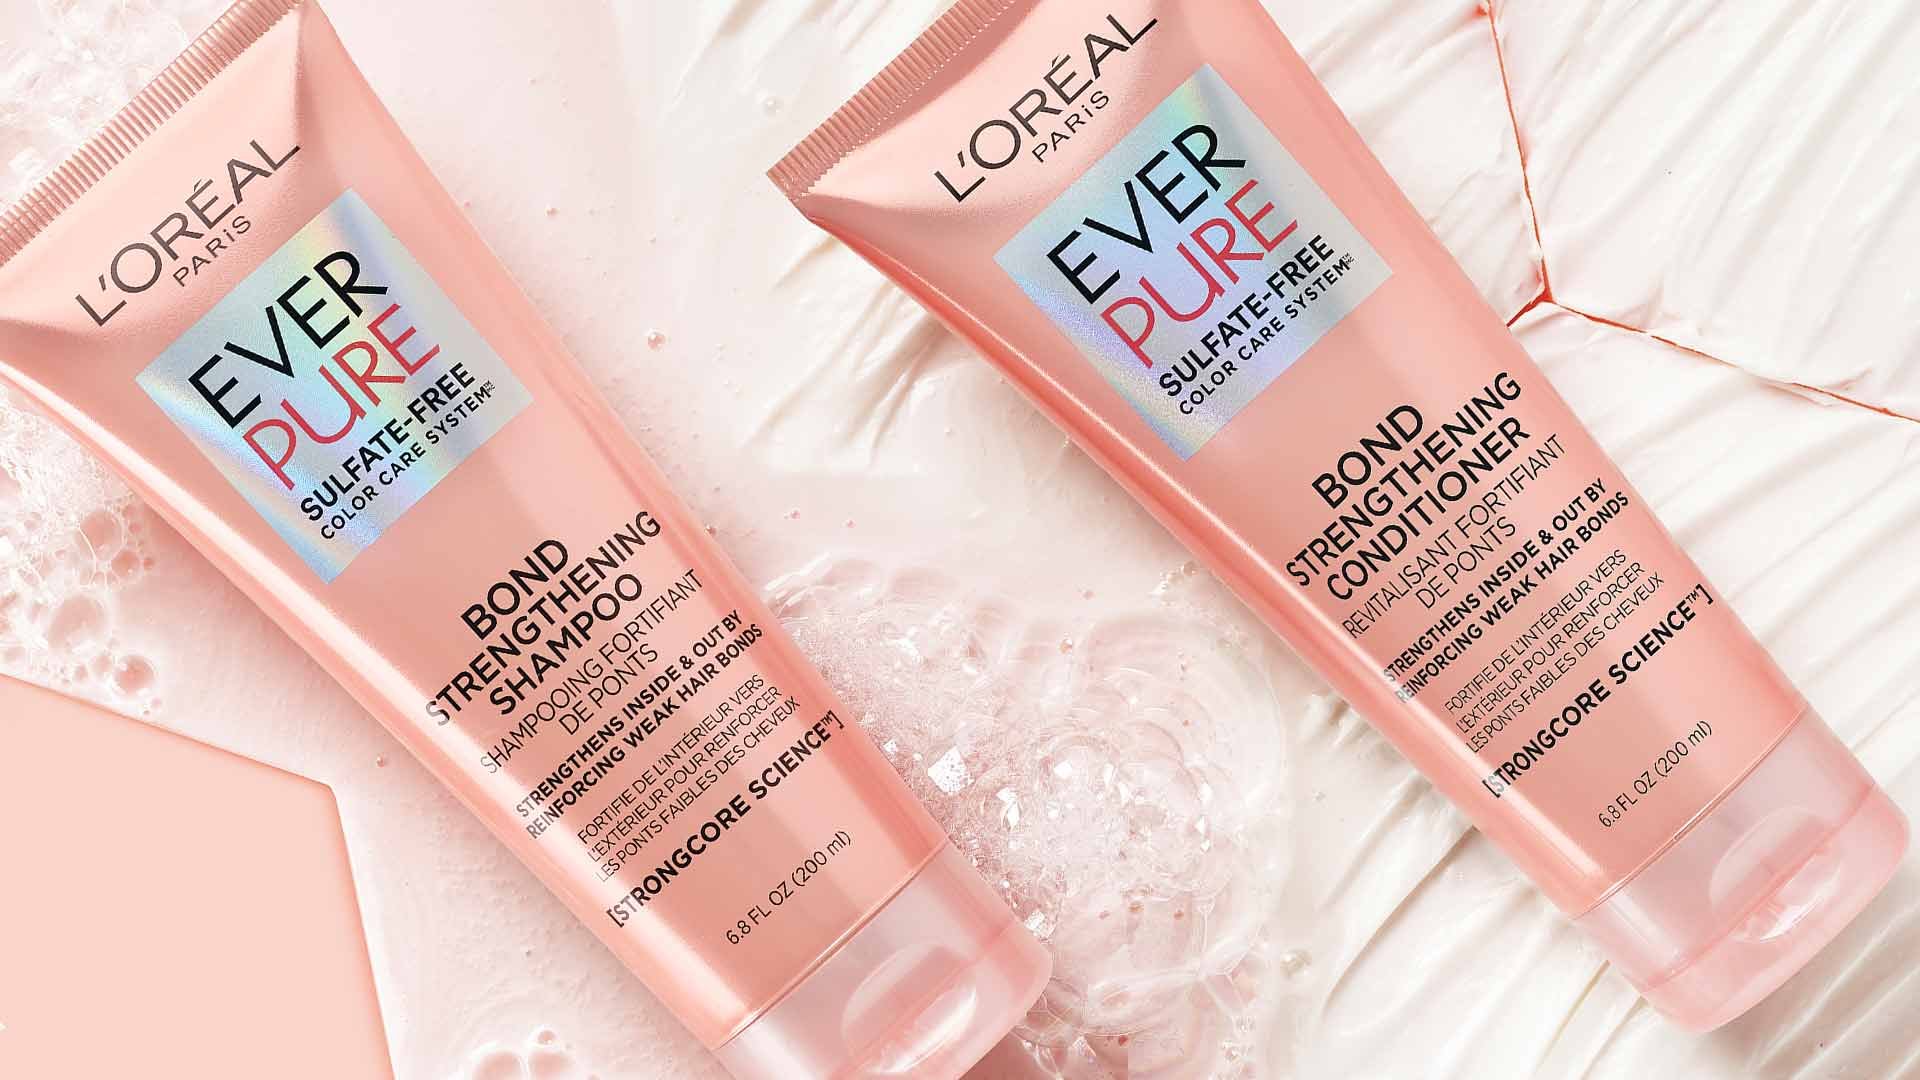 L'oreal Ever Pure Bond Strengthening Shampoo and Conditioner is an affordable store-bought shampoo option. 